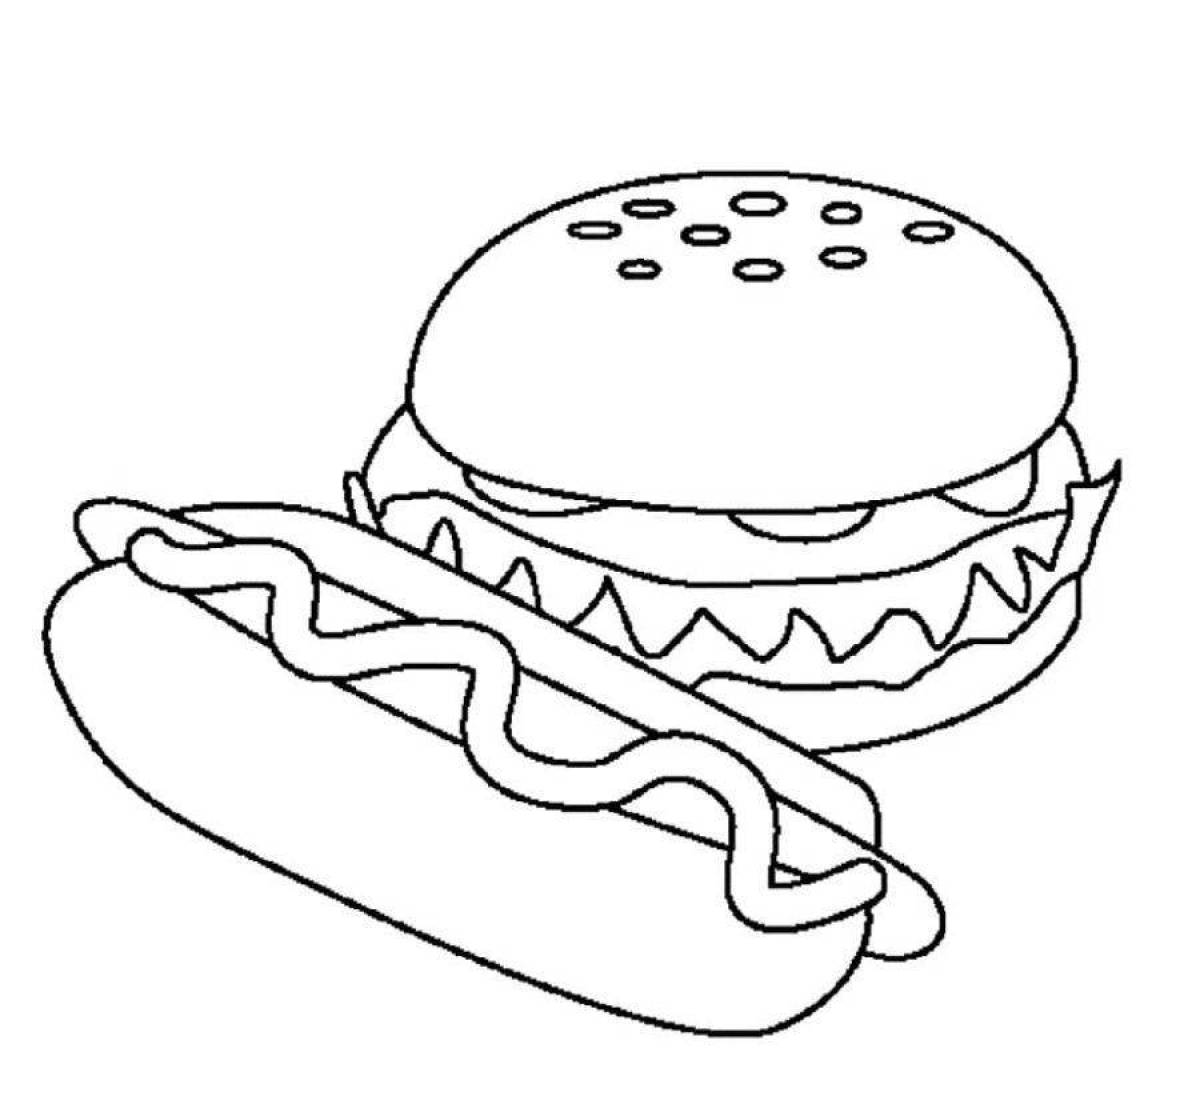 Coloring page happy burger for kids